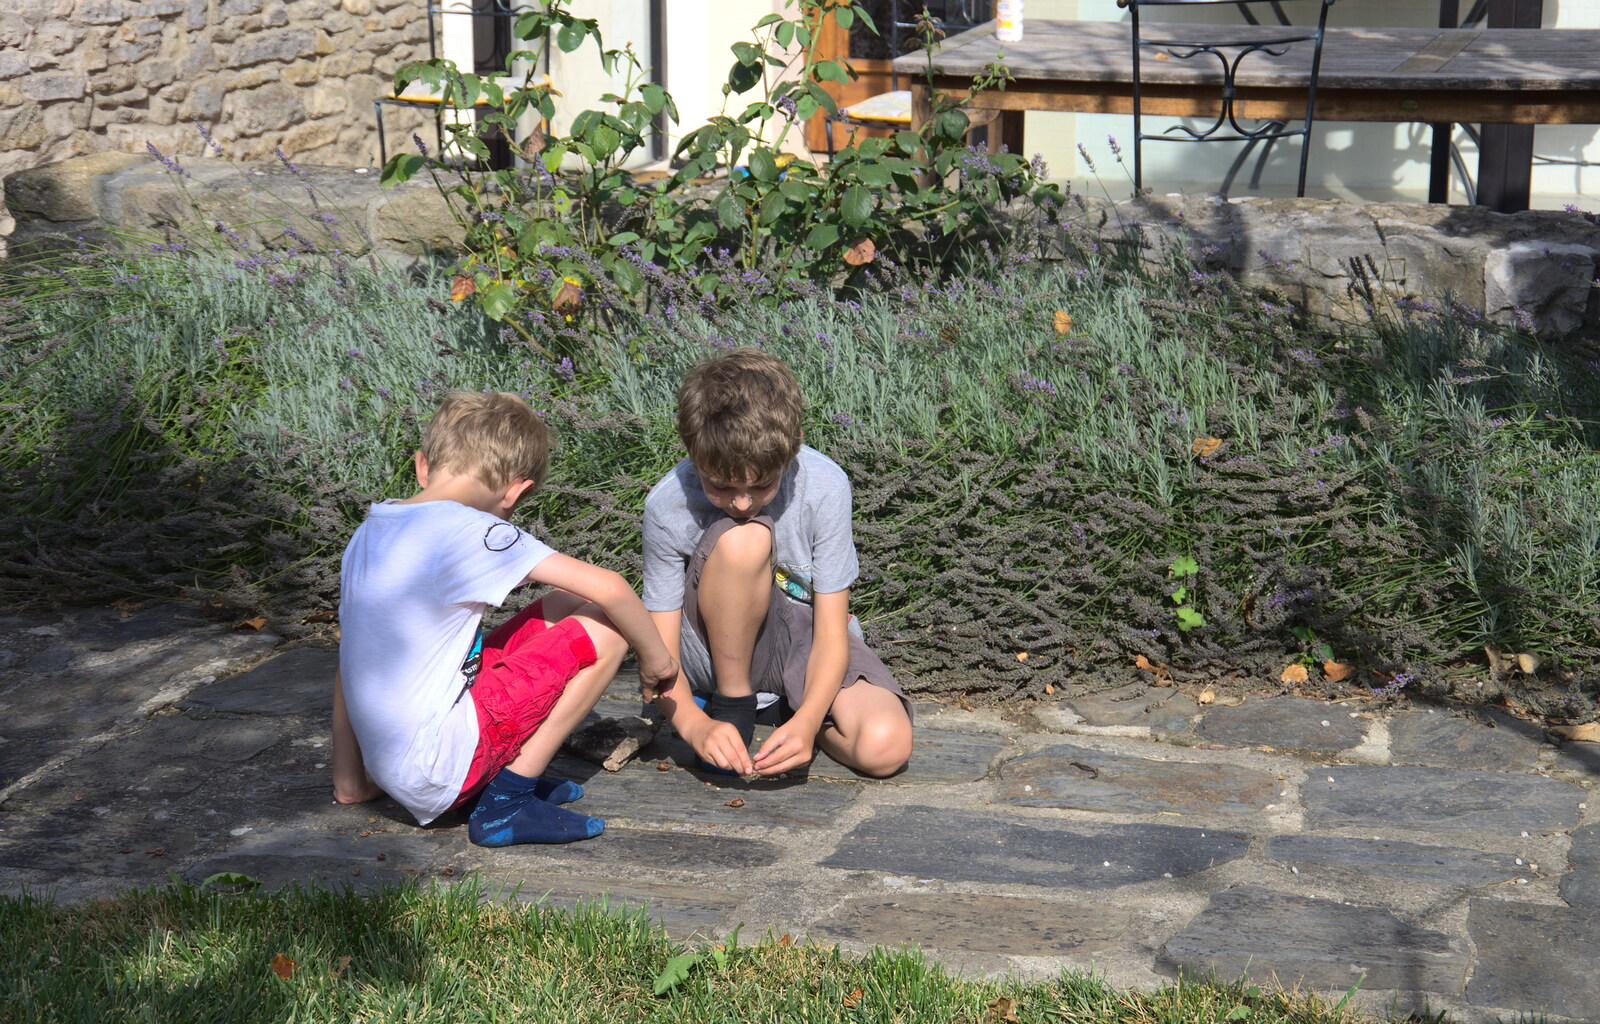 The boys play on the path from A Trip to Carcassonne, Aude, France - 8th August 2018